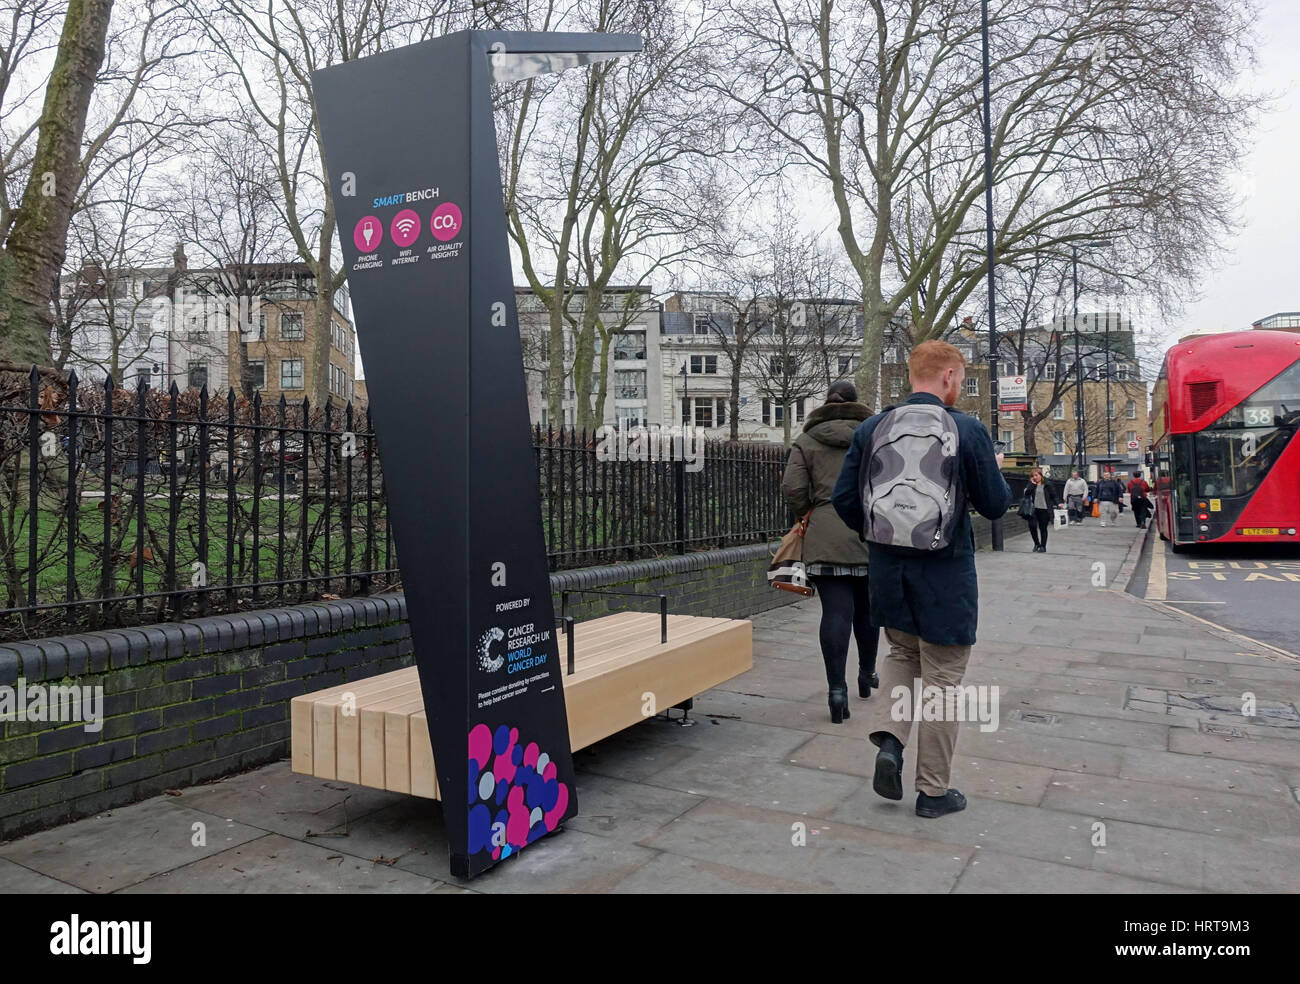 Public solar-powered 'smart bench' for charging mobile devices, Islington, London Stock Photo